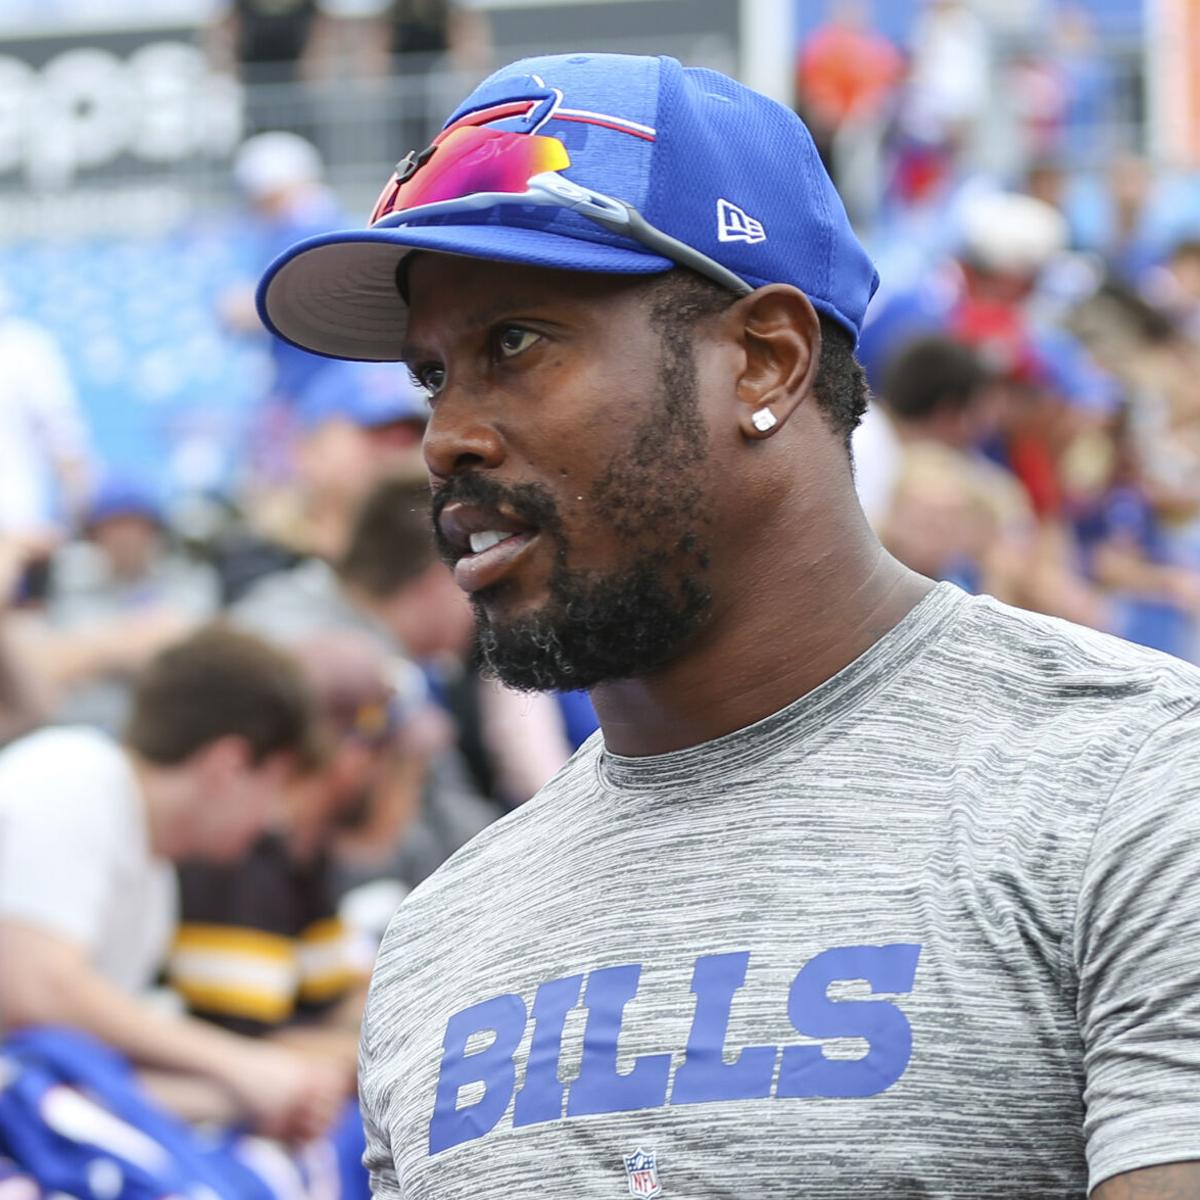 Sabato: Bills show the window is still wide open by mauling Miami